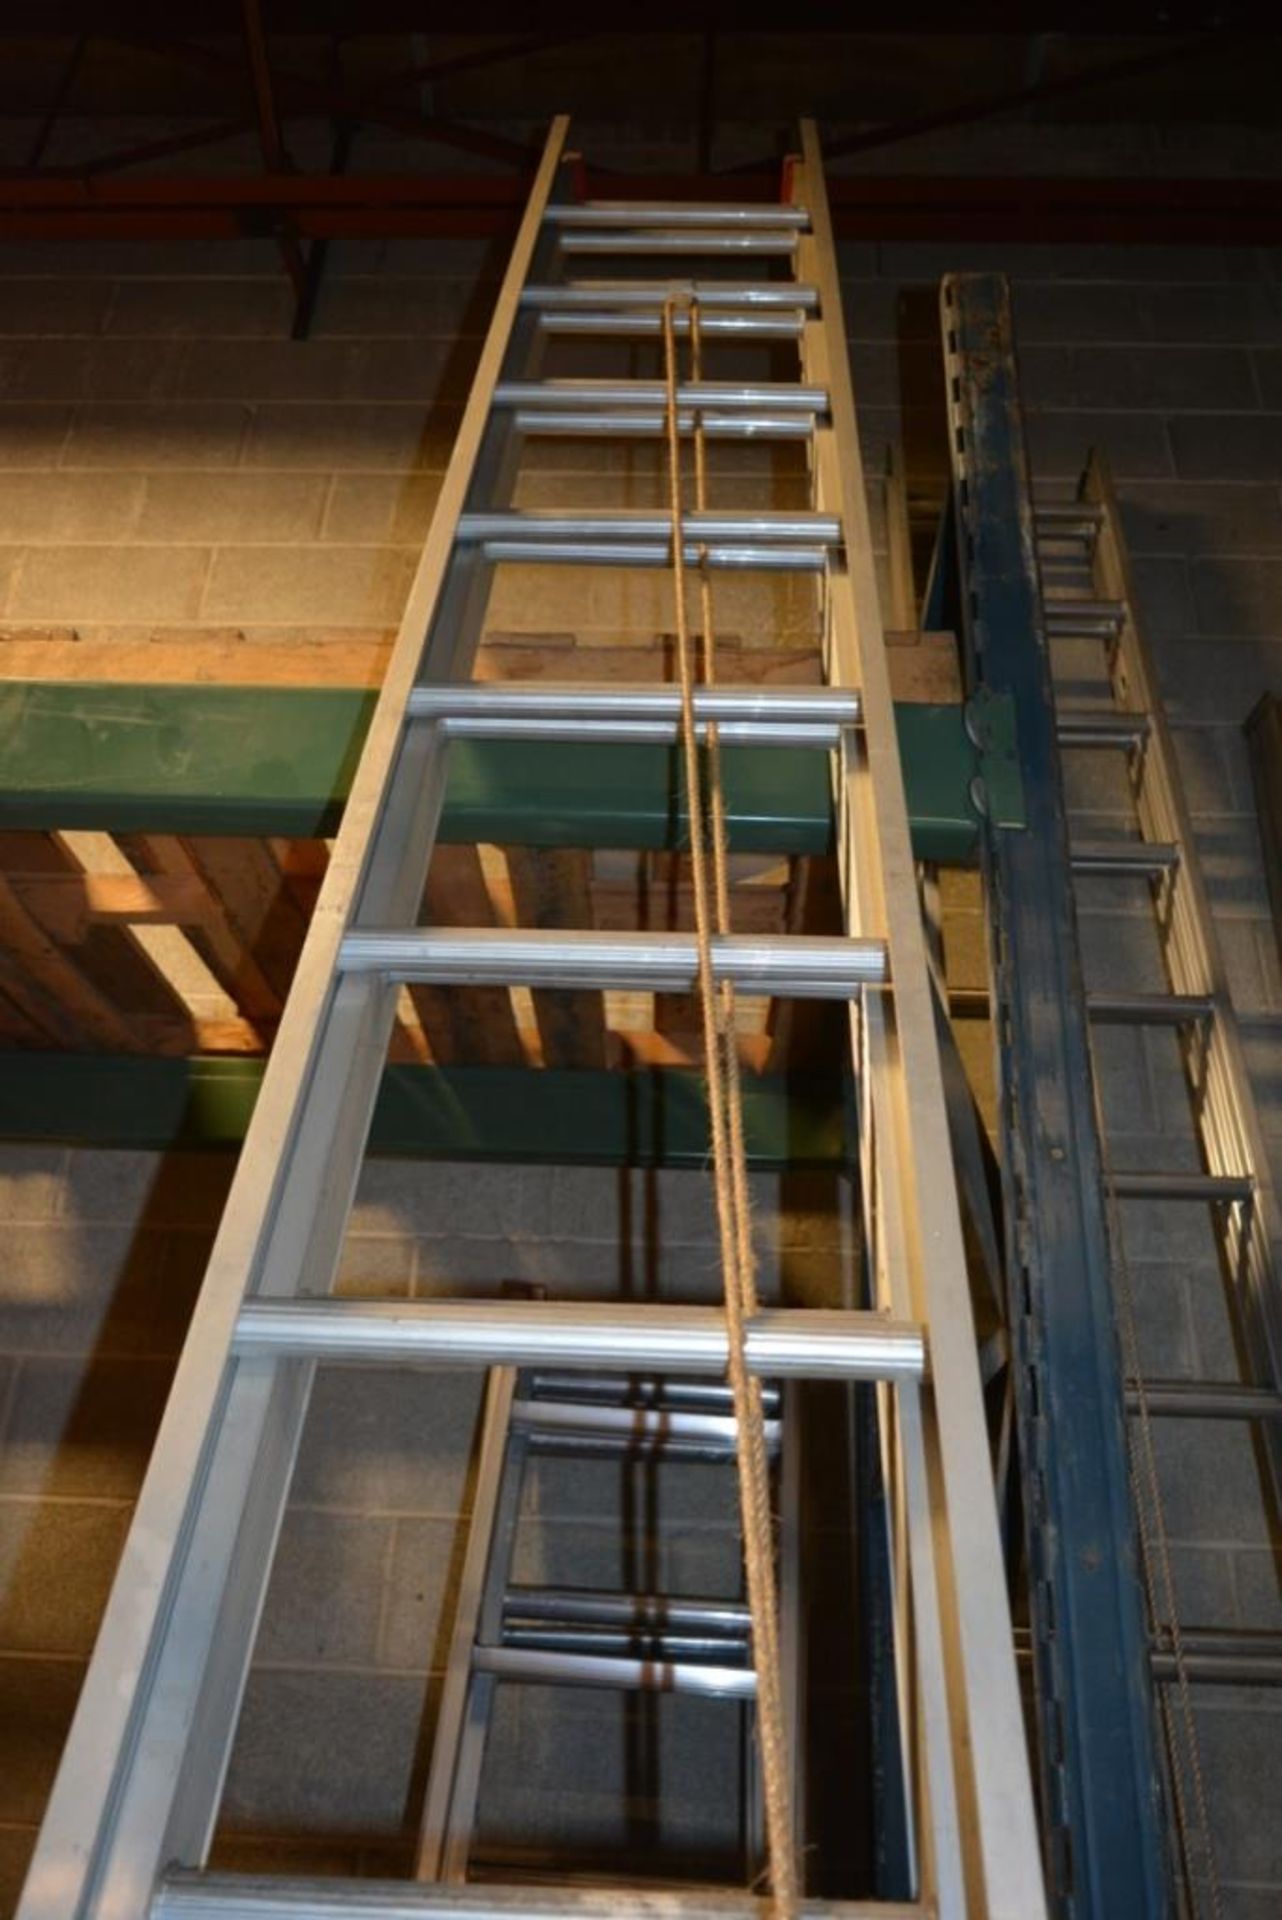 American 28' Aluminum Extention Ladder - Image 3 of 3